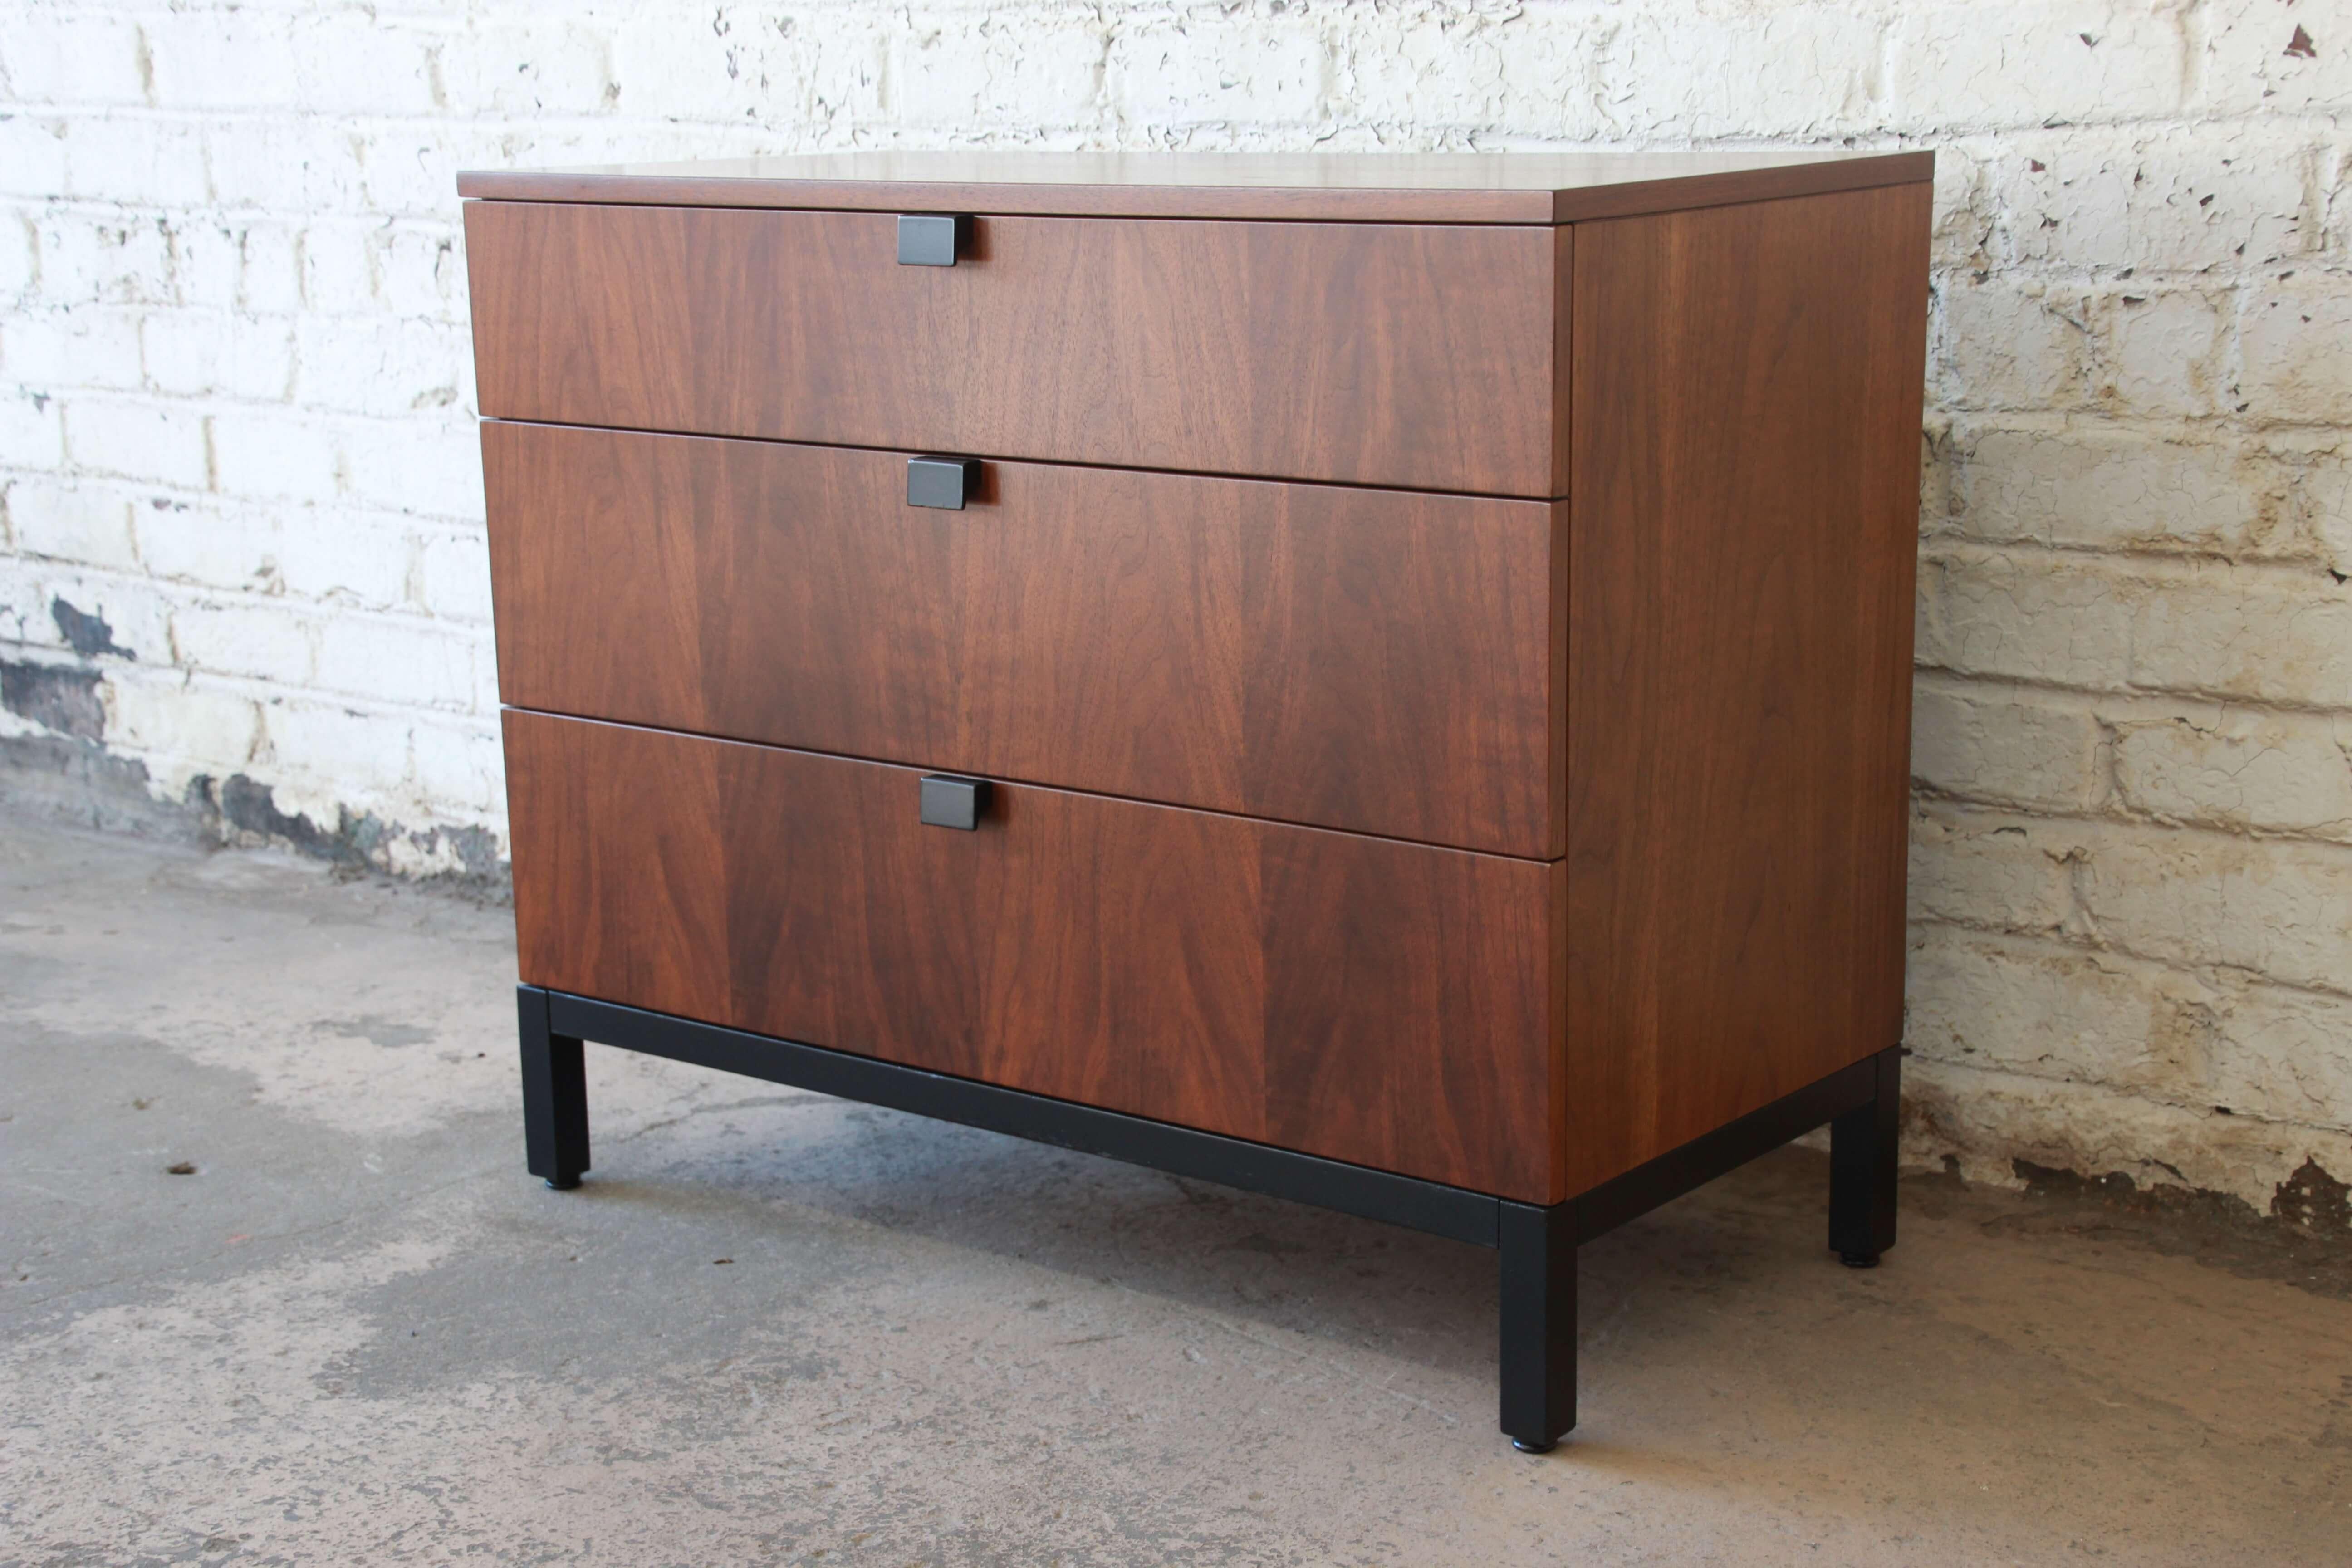 Offering an excellent bachelor chest or large nightstand by Milo Baughman for directional. The chest has a very nice walnut wood grain and three large drawers offering organization and plenty of storage. It is accented with a black lacquered base